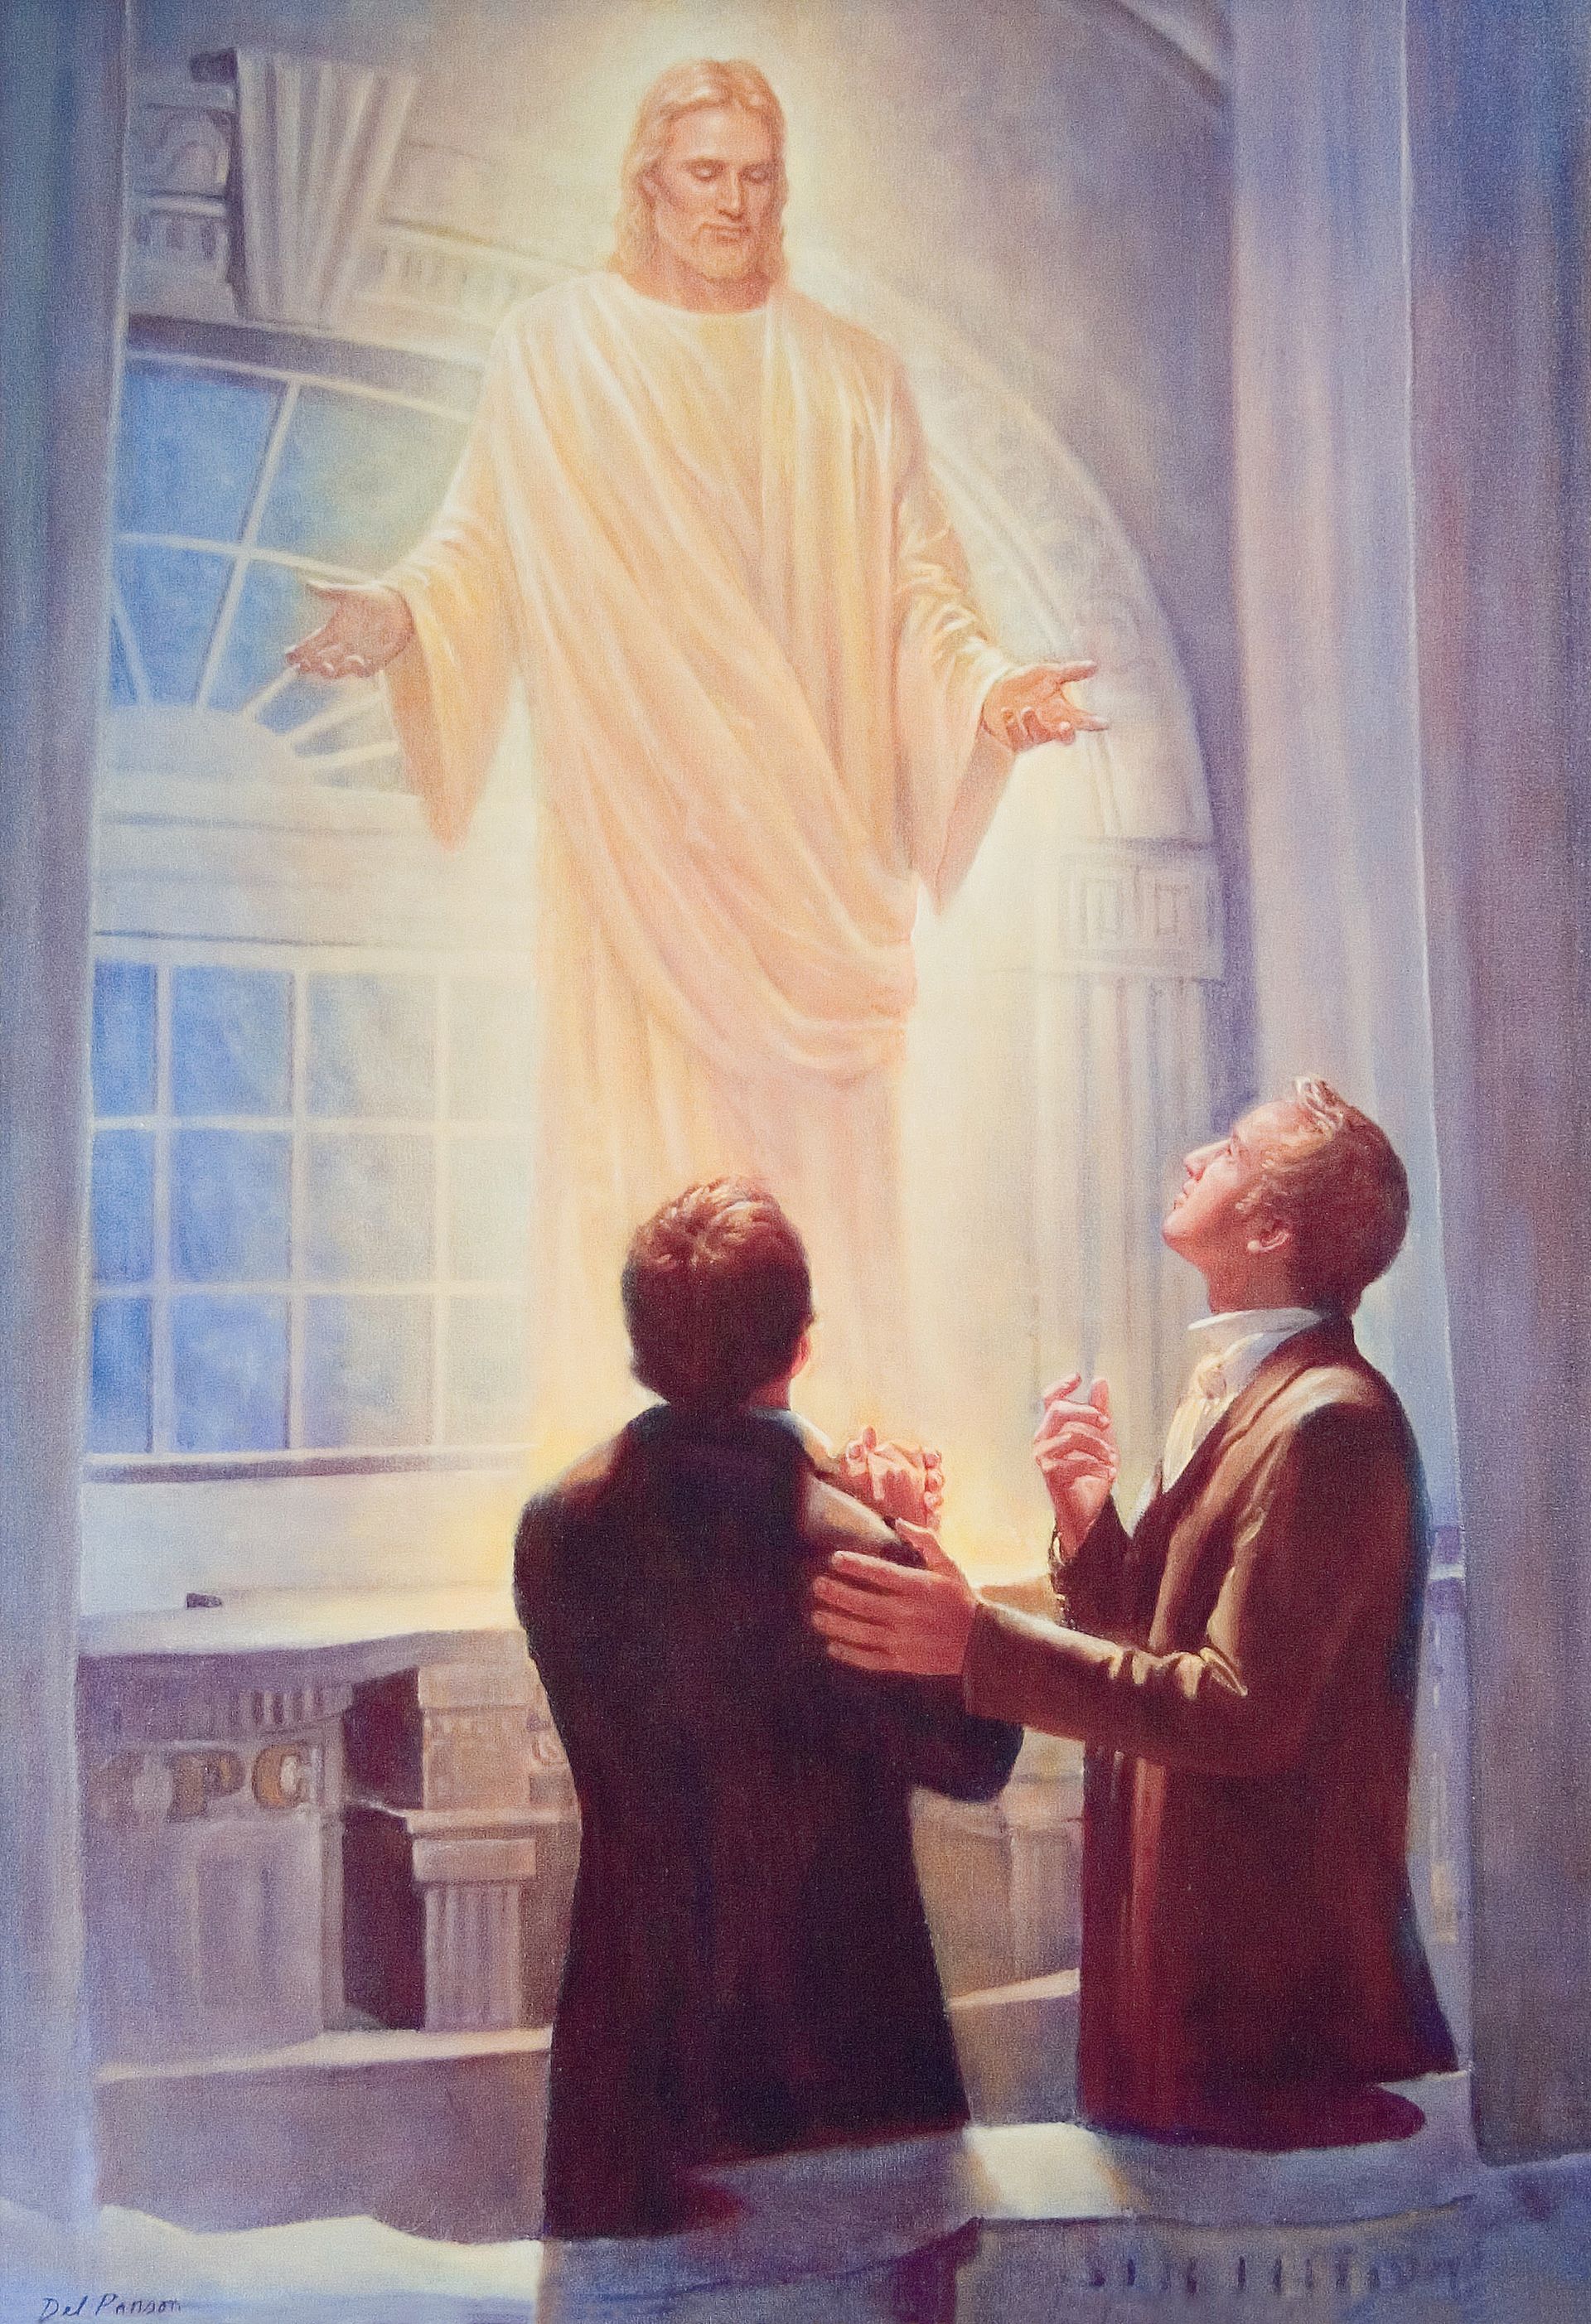 The Lord Appears in the Kirtland Temple, by Del Parson